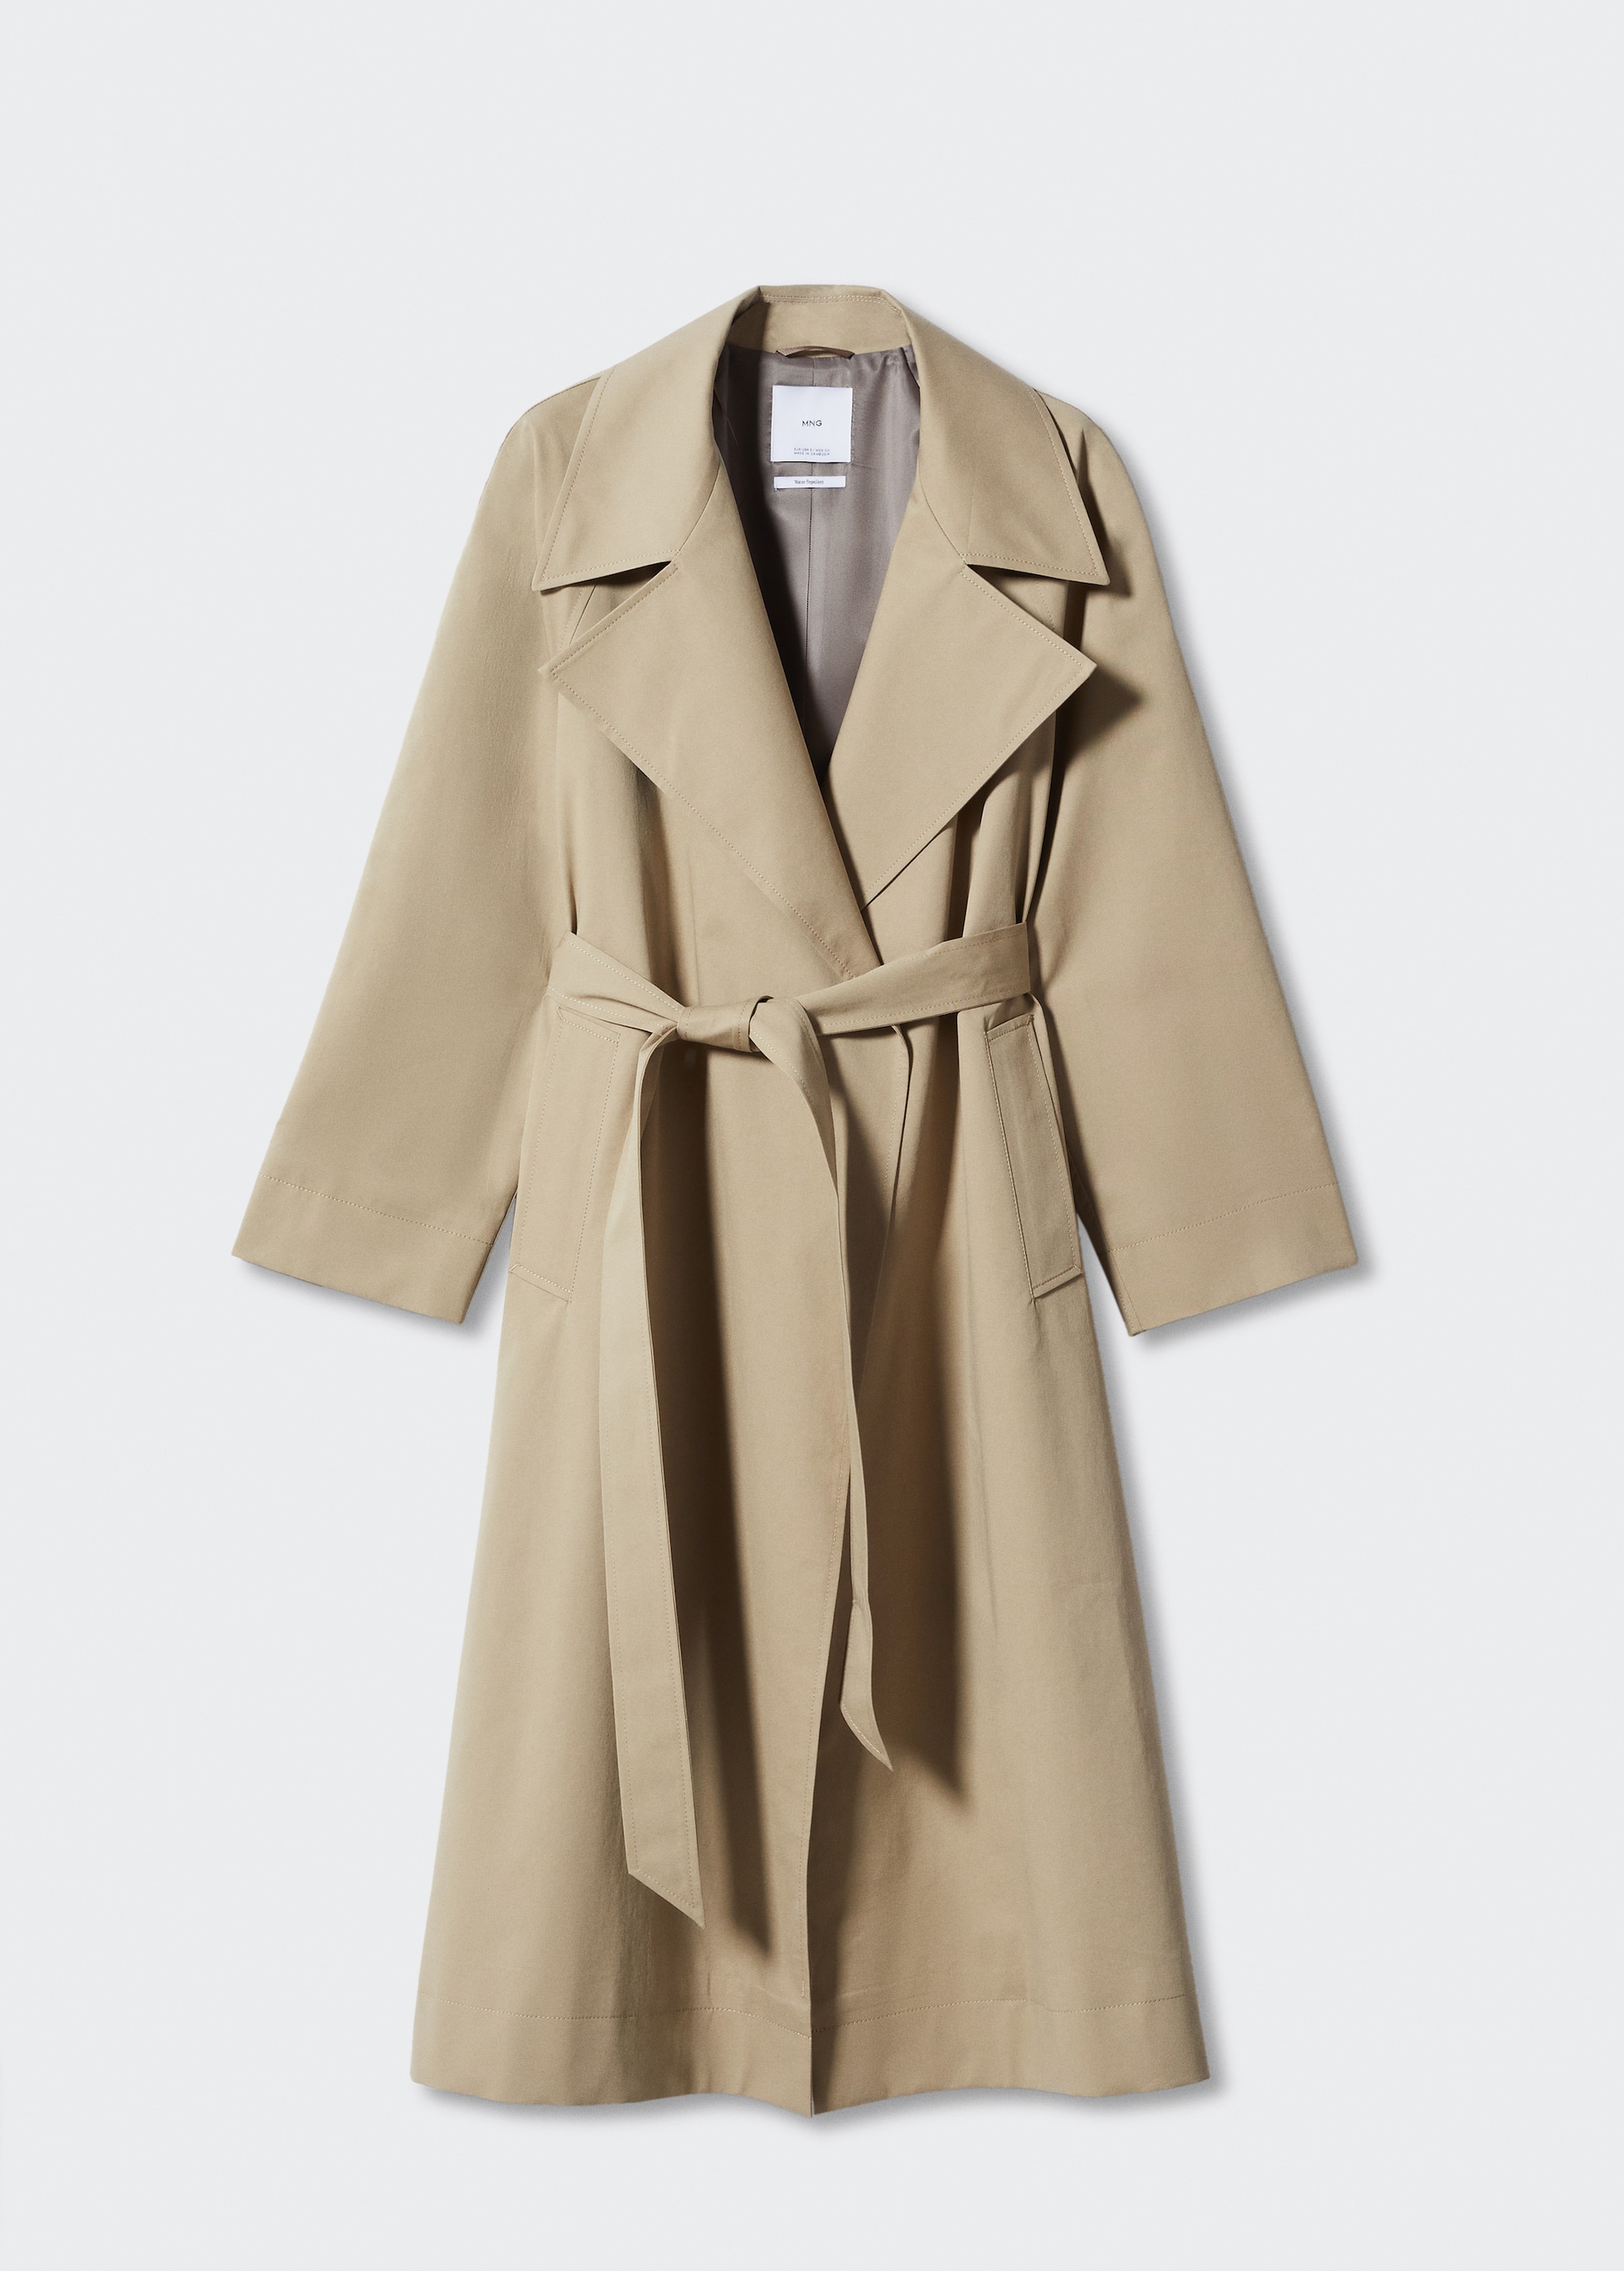 Oversized cotton trench coat - Article without model